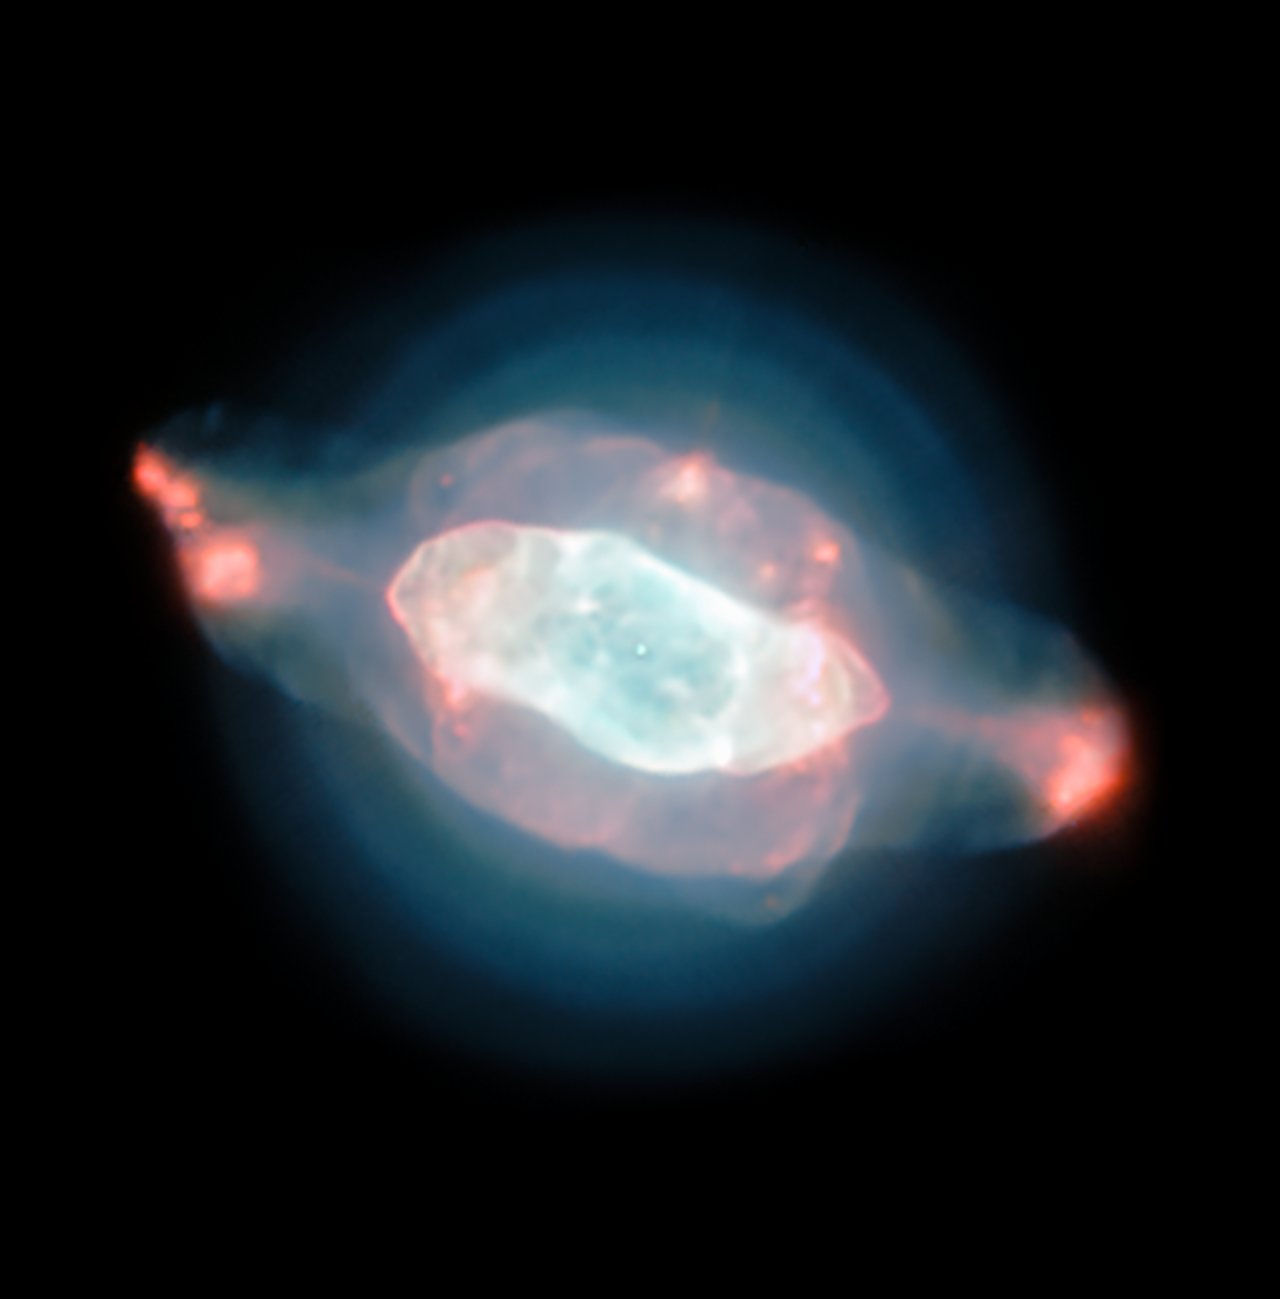 The spectacular planetary nebula NGC 7009, or the Saturn Nebula, emerges from the darkness like a series of oddly-shaped bubbles, lit up in glorious pinks and blues. This colourful image was captured by the powerful MUSE instrument on ESO’s Very Large Telescope (VLT), as part of a study which mapped the dust inside a planetary nebula for the first time.